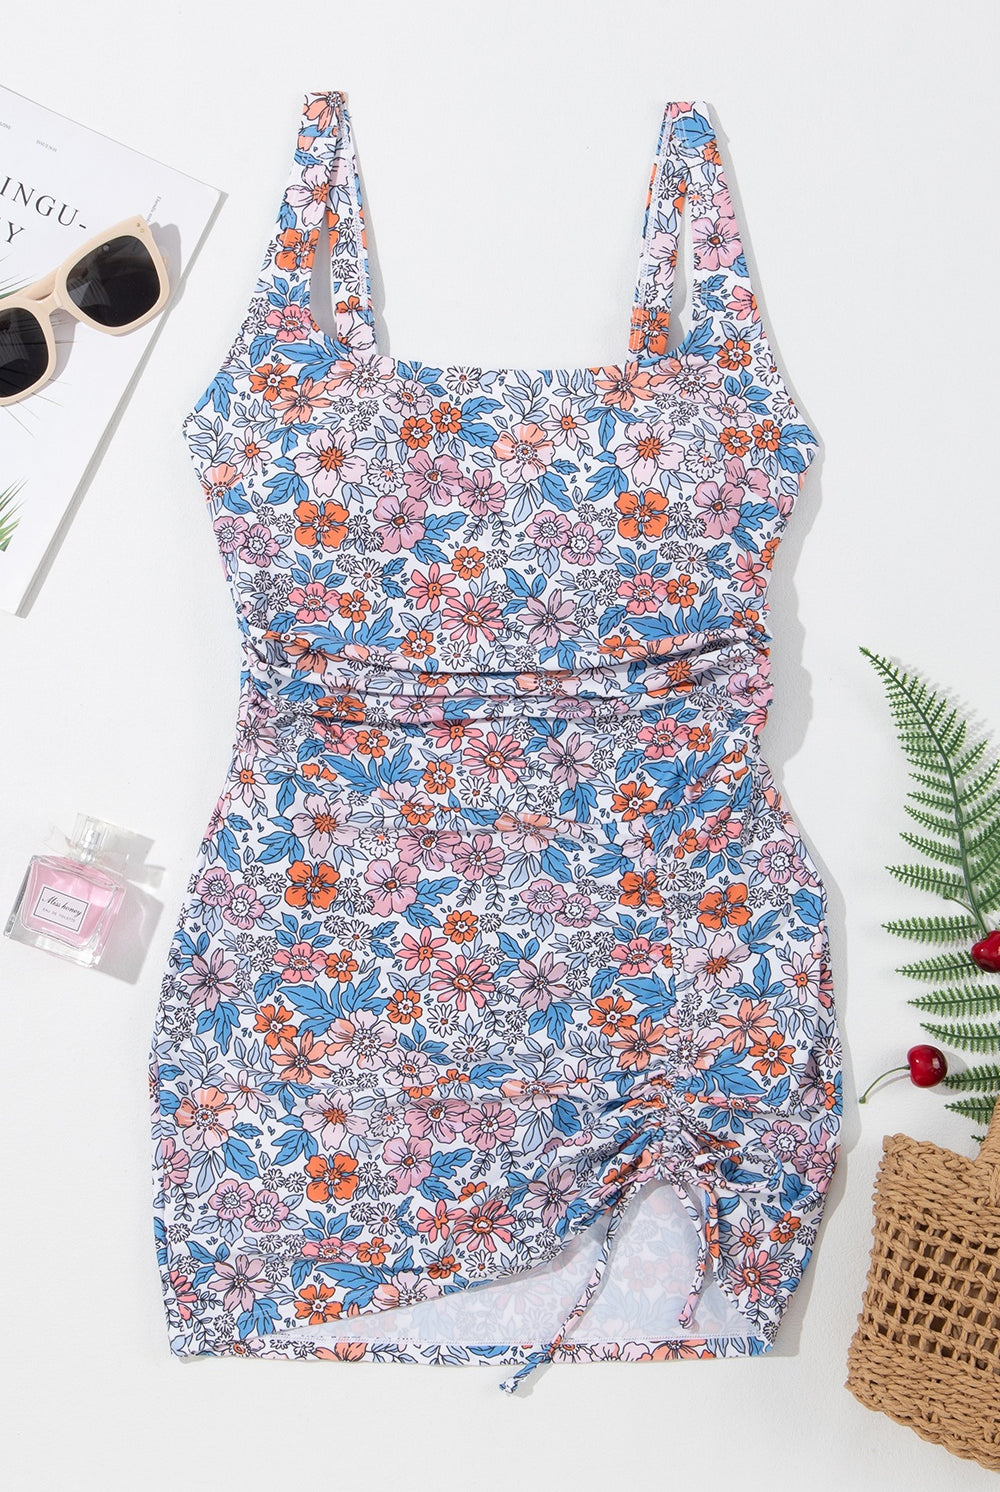 Woman by the sea wearing a stylish floral swim dress with a playful drawstring detail, ready for summer fun.